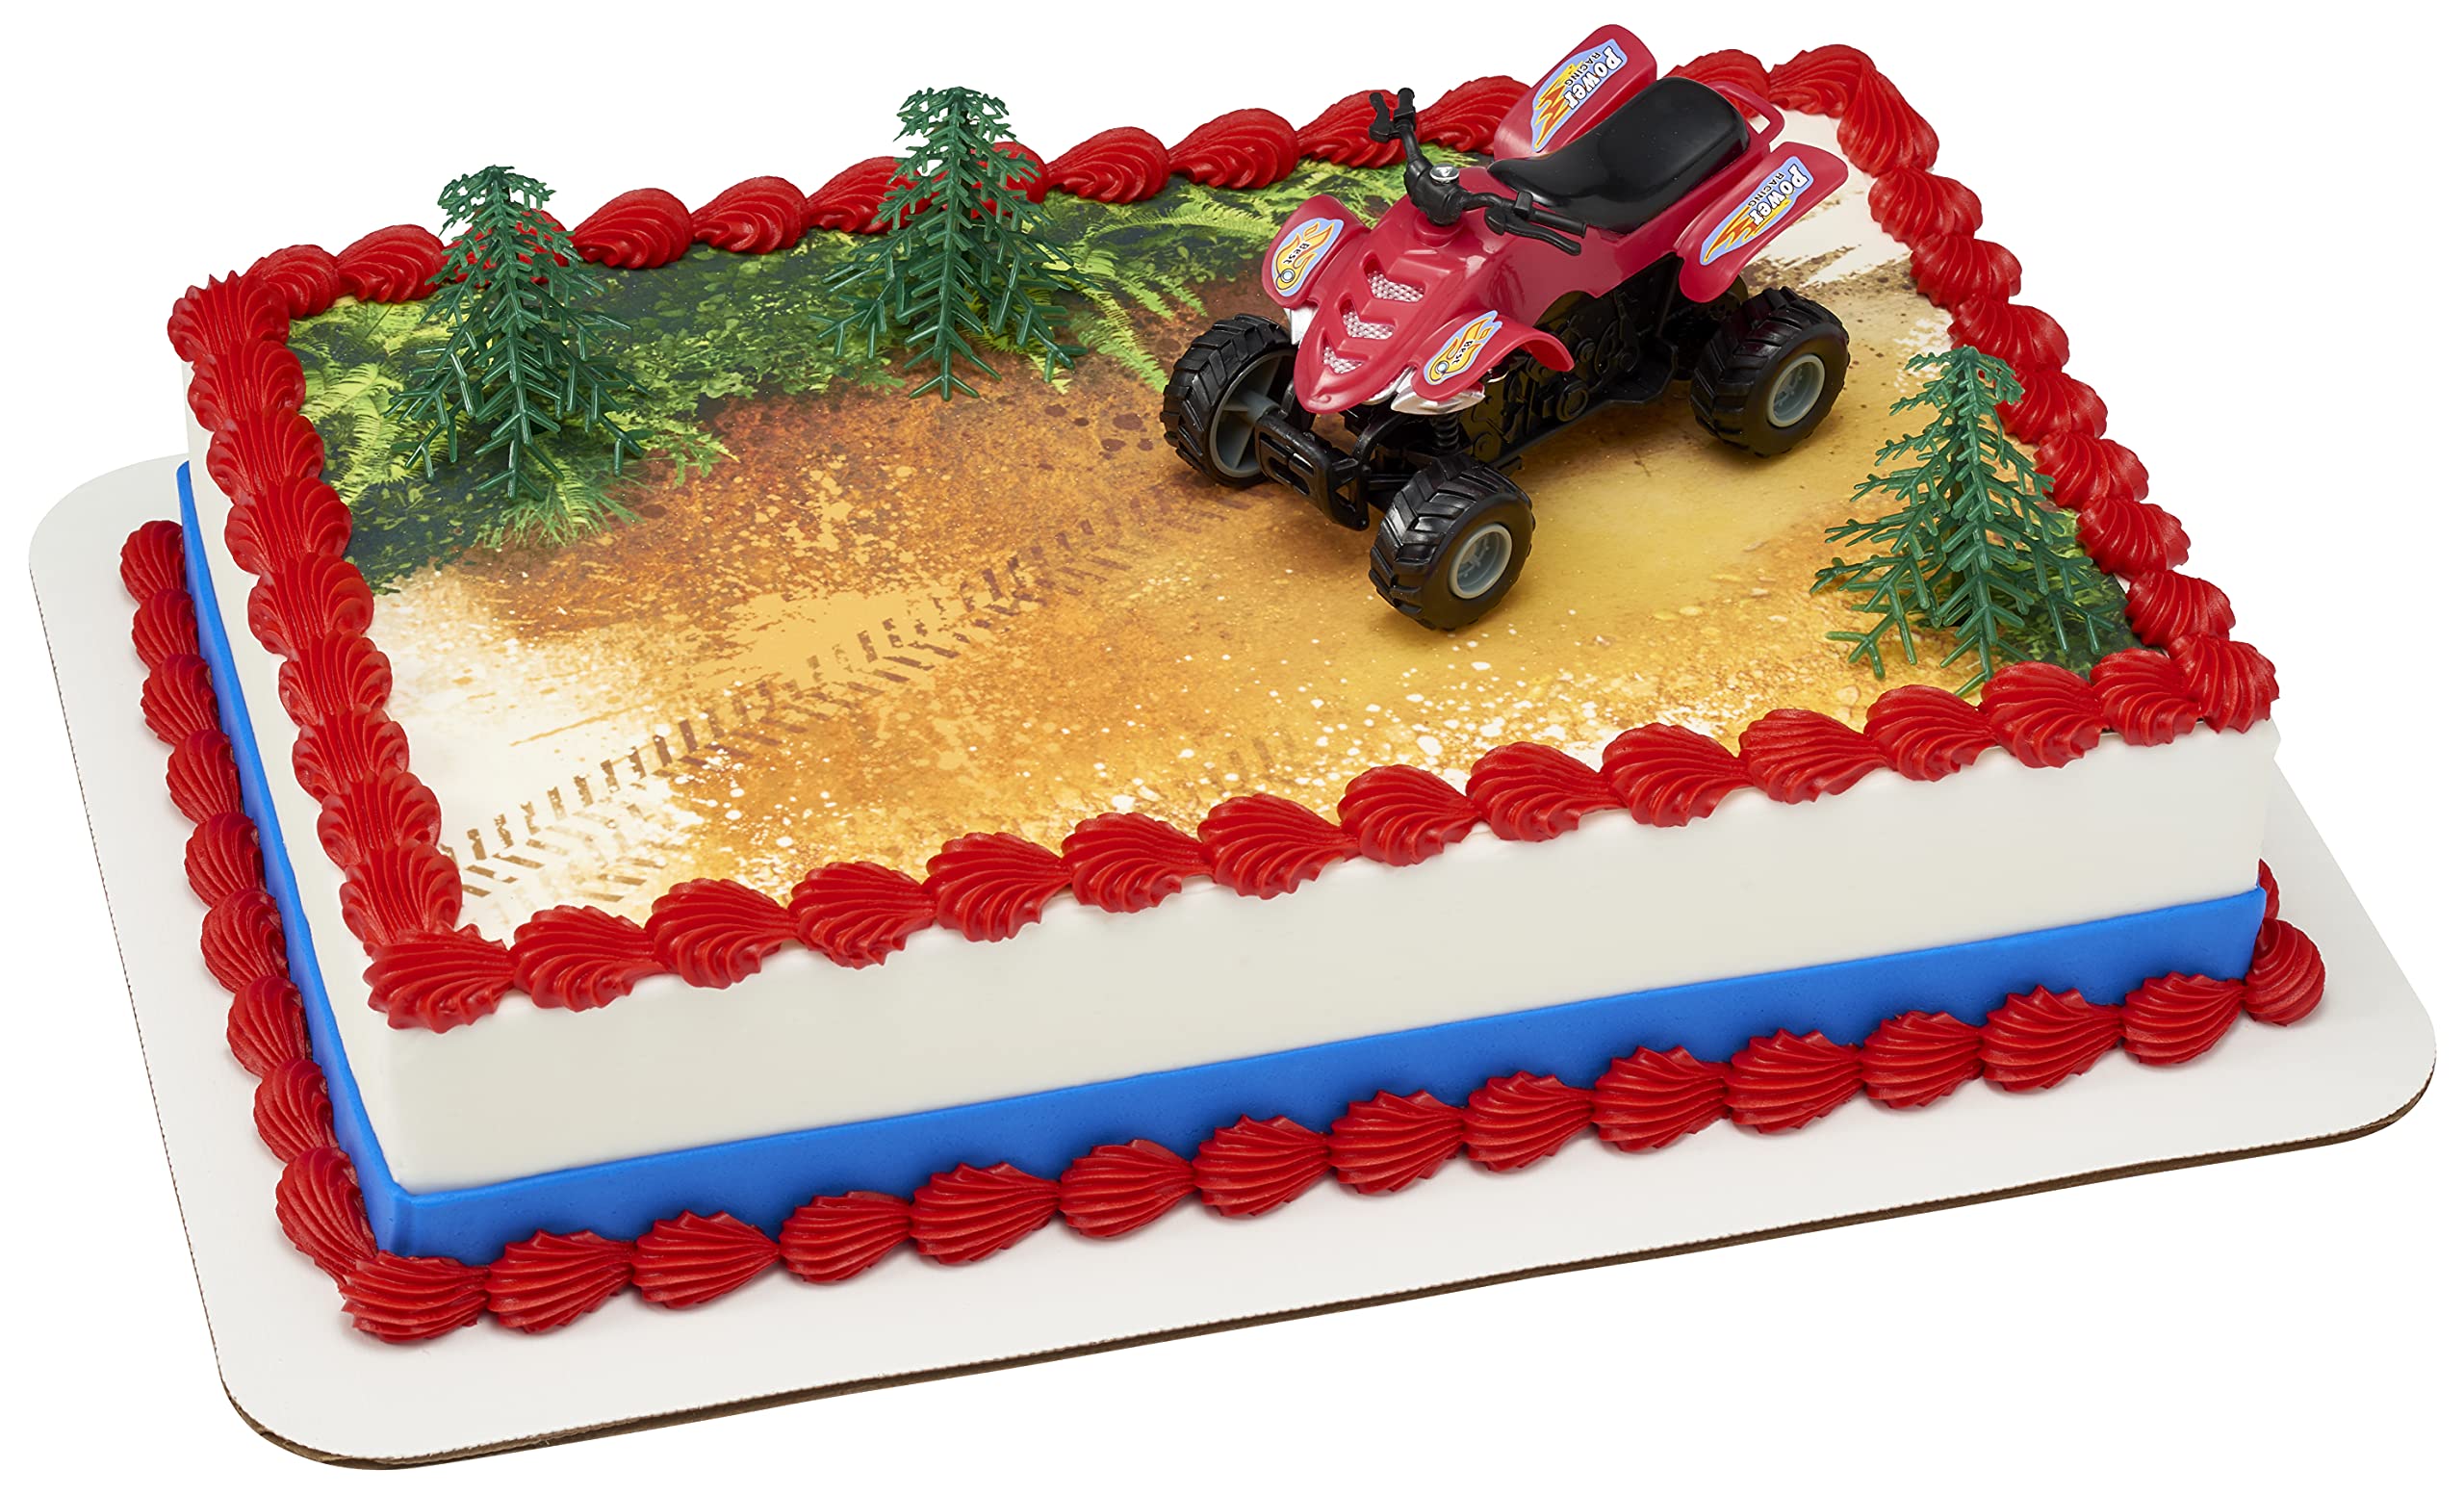 DecoPac ATV Cake Decoration, 4 Piece Cake Topper, Free Rolling All Terrain Vehicle And Trees Cake Decoration For Birthday, Events, Celebrations, Food Safe, Ready to Use ATV DecoSet Red